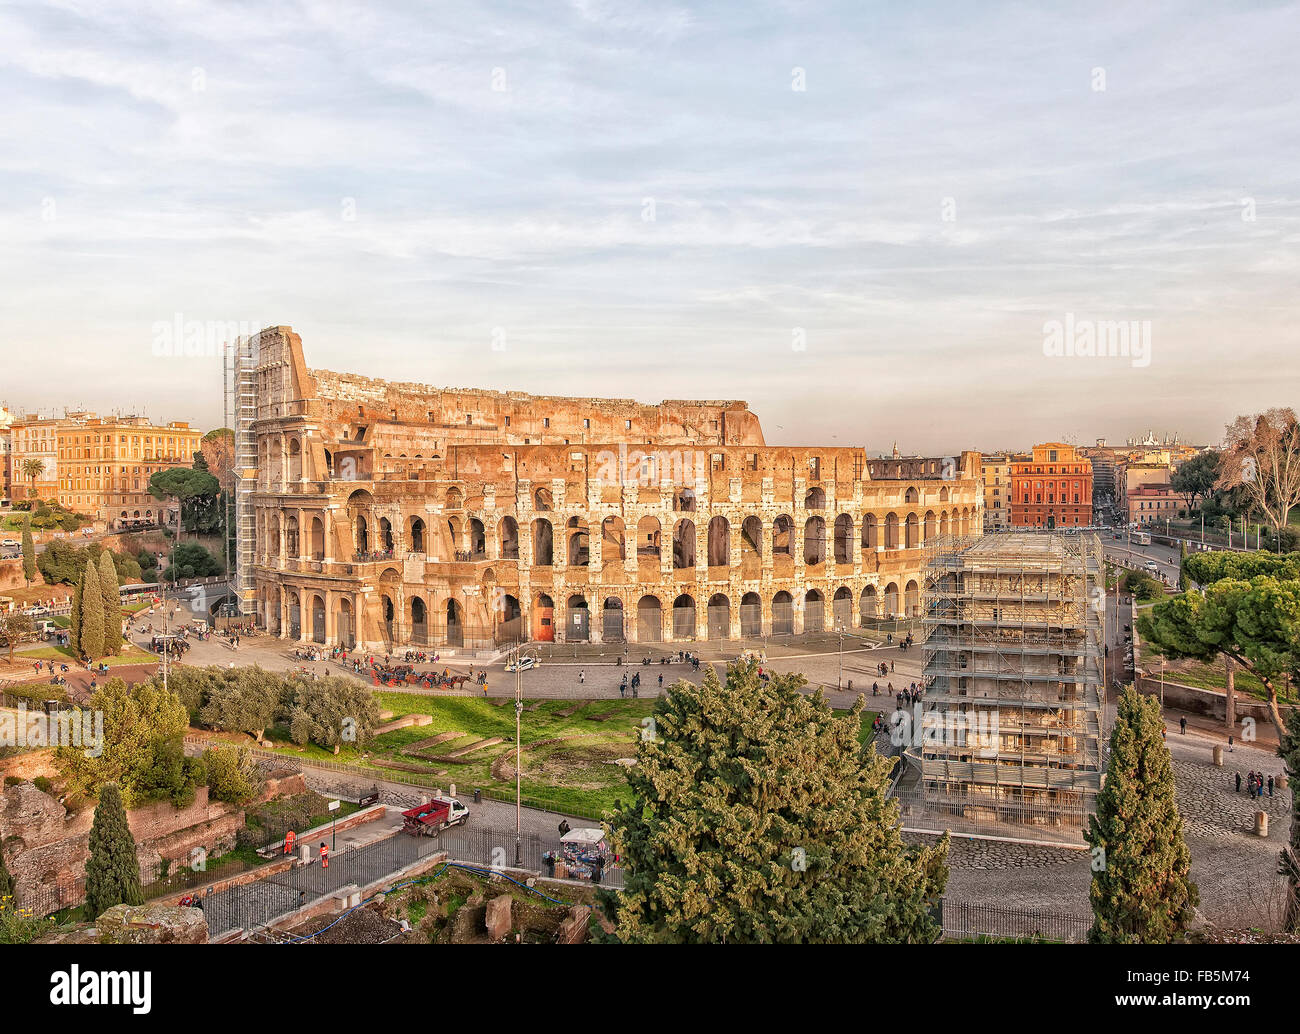 The ancient ruin of the Roman Colosseum amphitheater situated in the Italien capital of Rome. Stock Photo